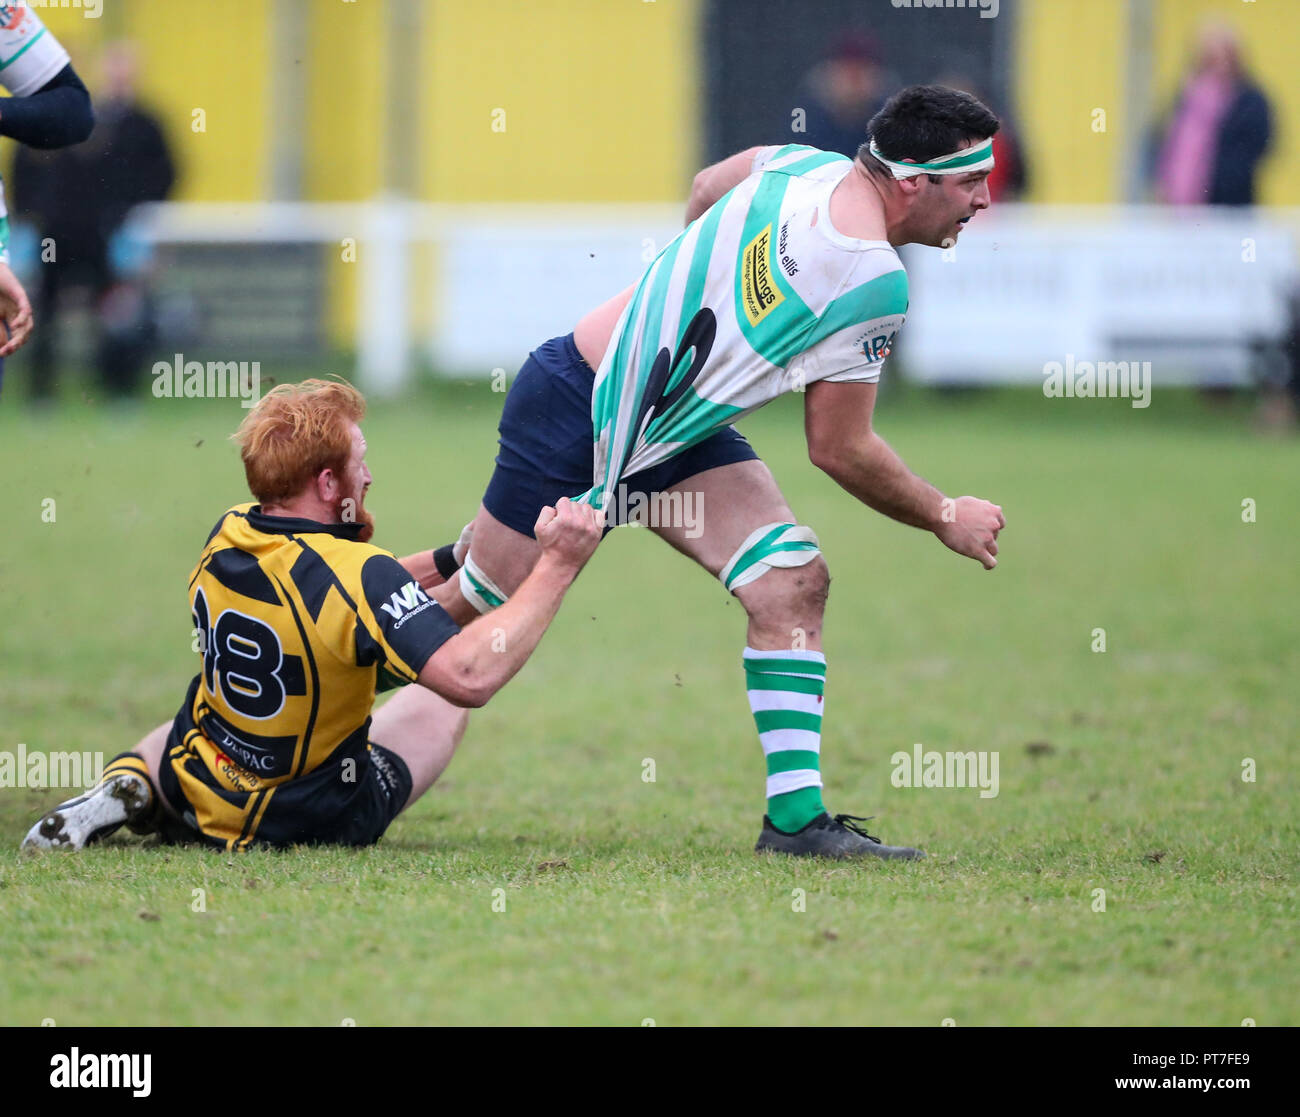 Leicester, England. Rugby Union, Hinckley rfc v South Leicester rfc.   Dan Ireland (South Leicester)  is tackled by Jamie Skerritt (Hinckley) during the RFU National League 2 North (NL2N) game played at the Leicester  Road Stadium.  © Phil Hutchinson / Alamy Live News Stock Photo